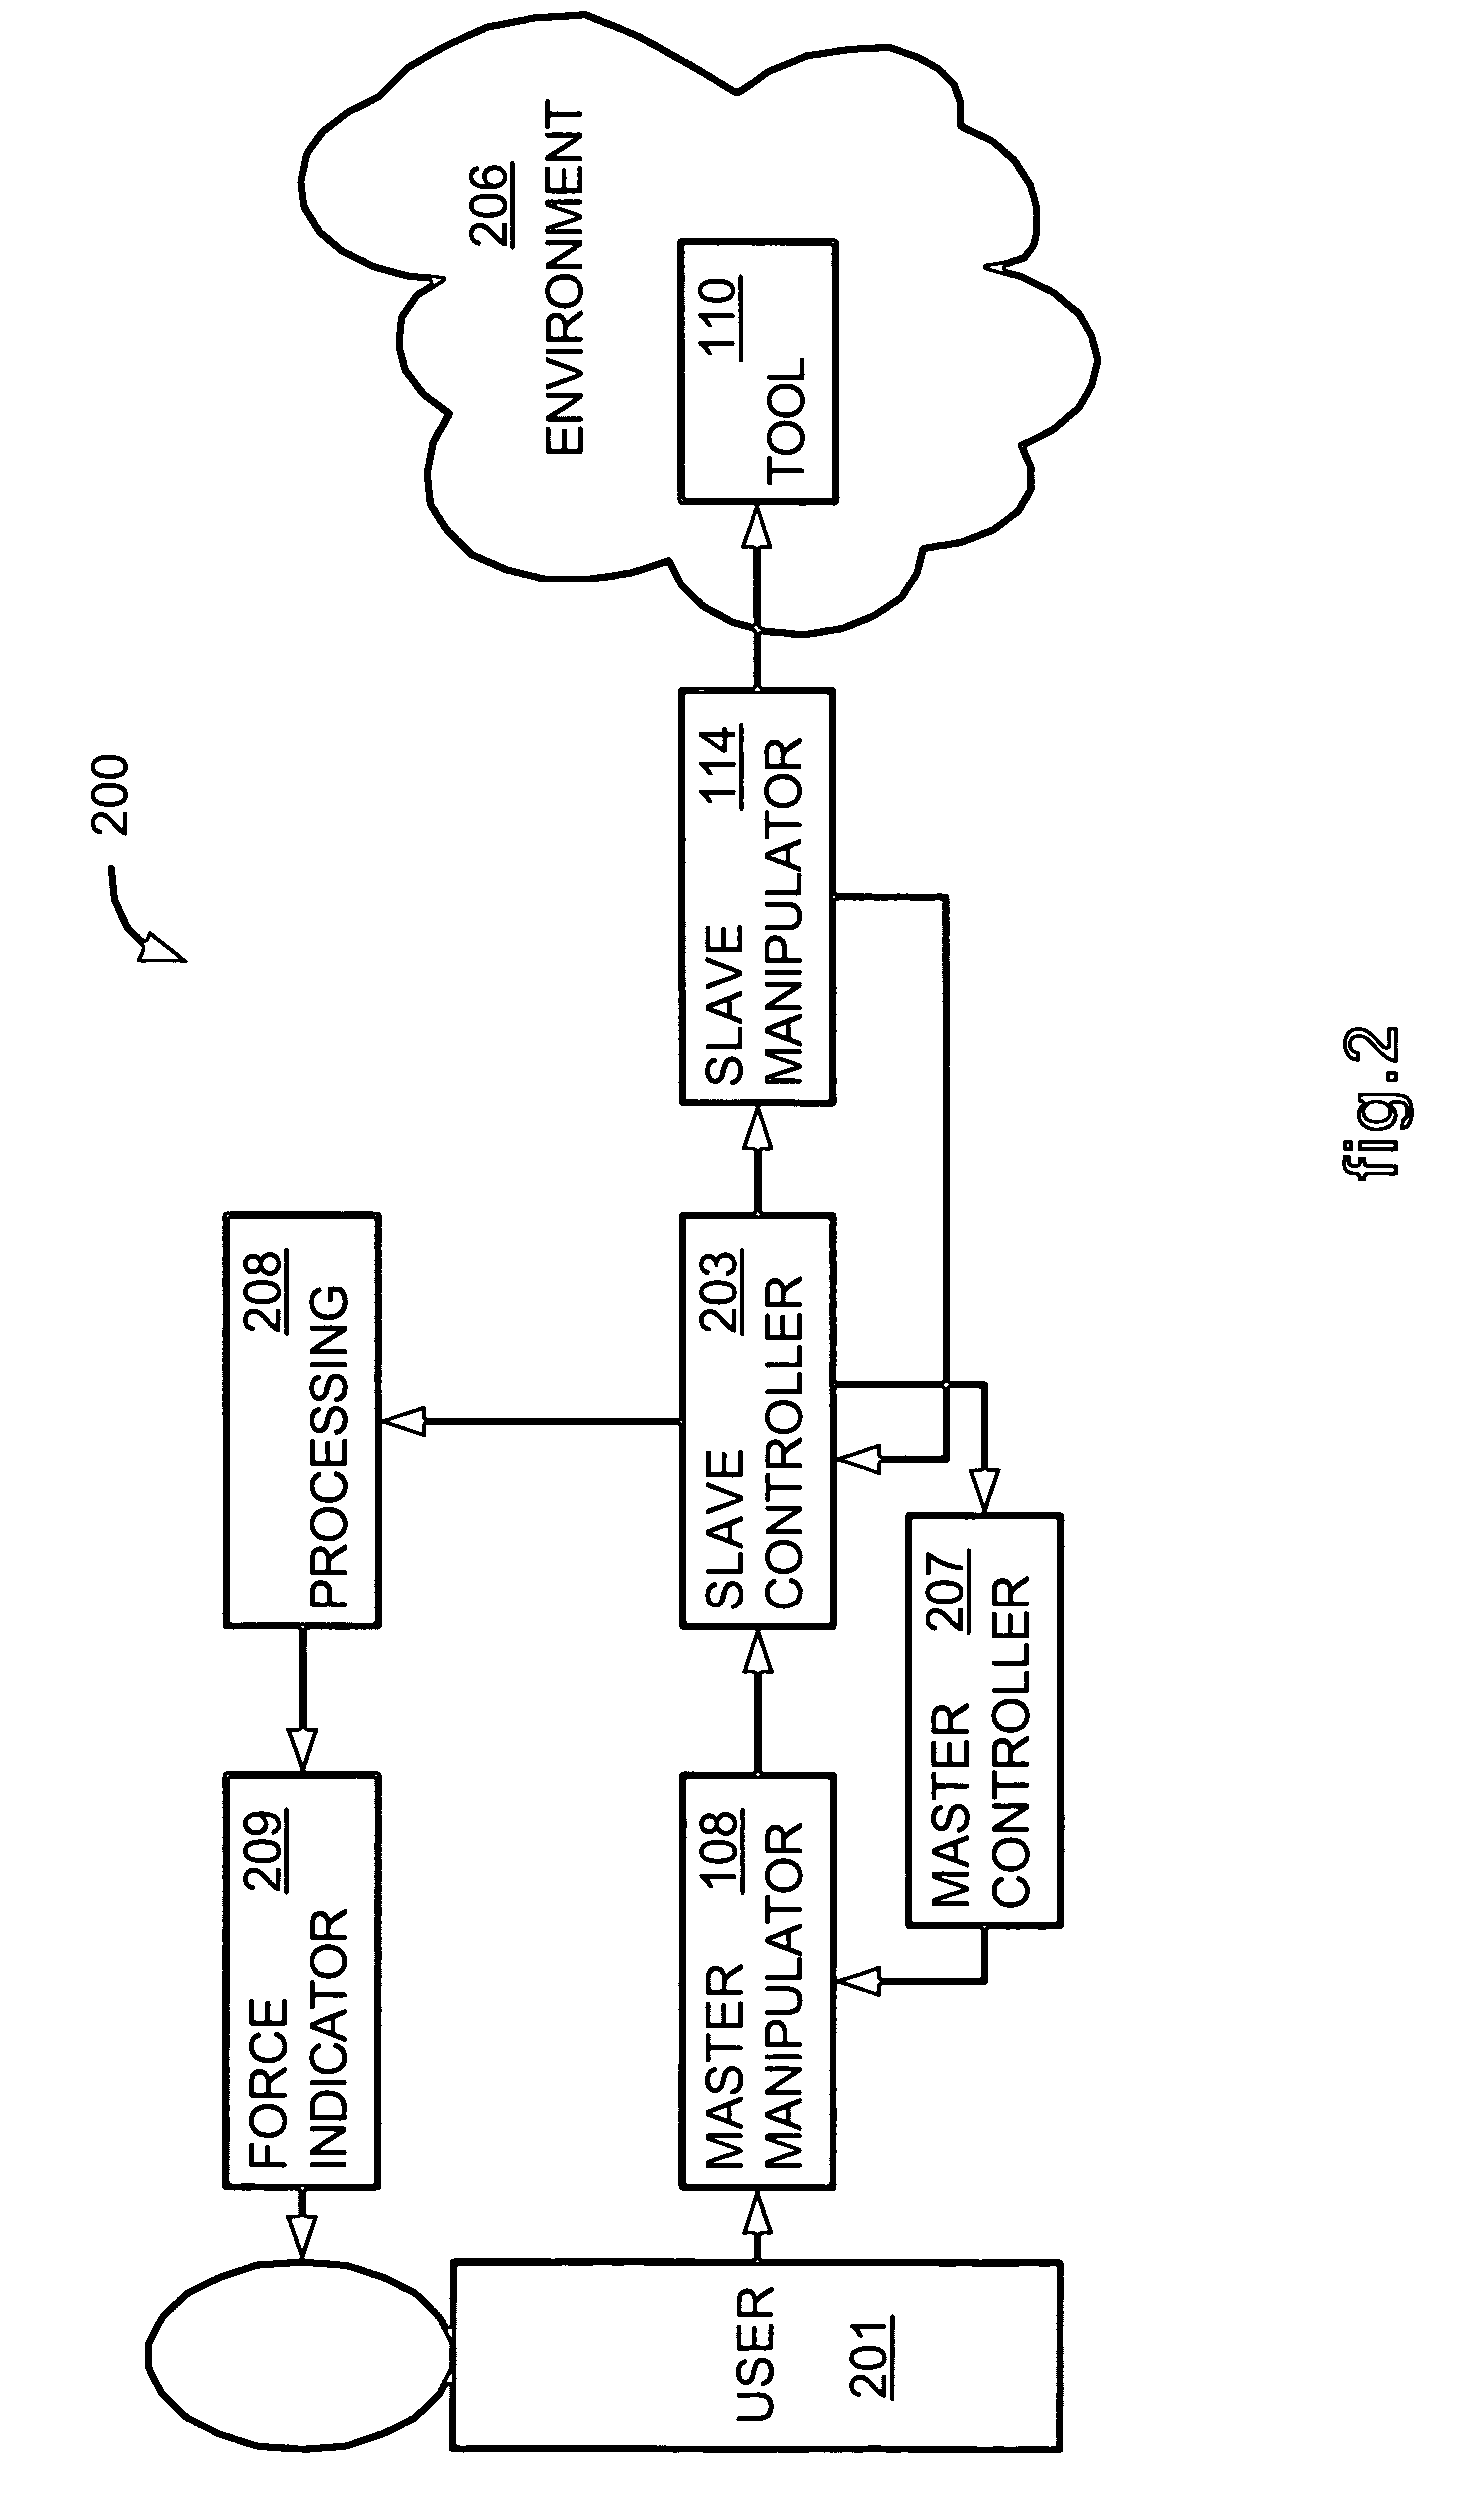 Non-force reflecting method for providing tool force information to a user of a telesurgical system